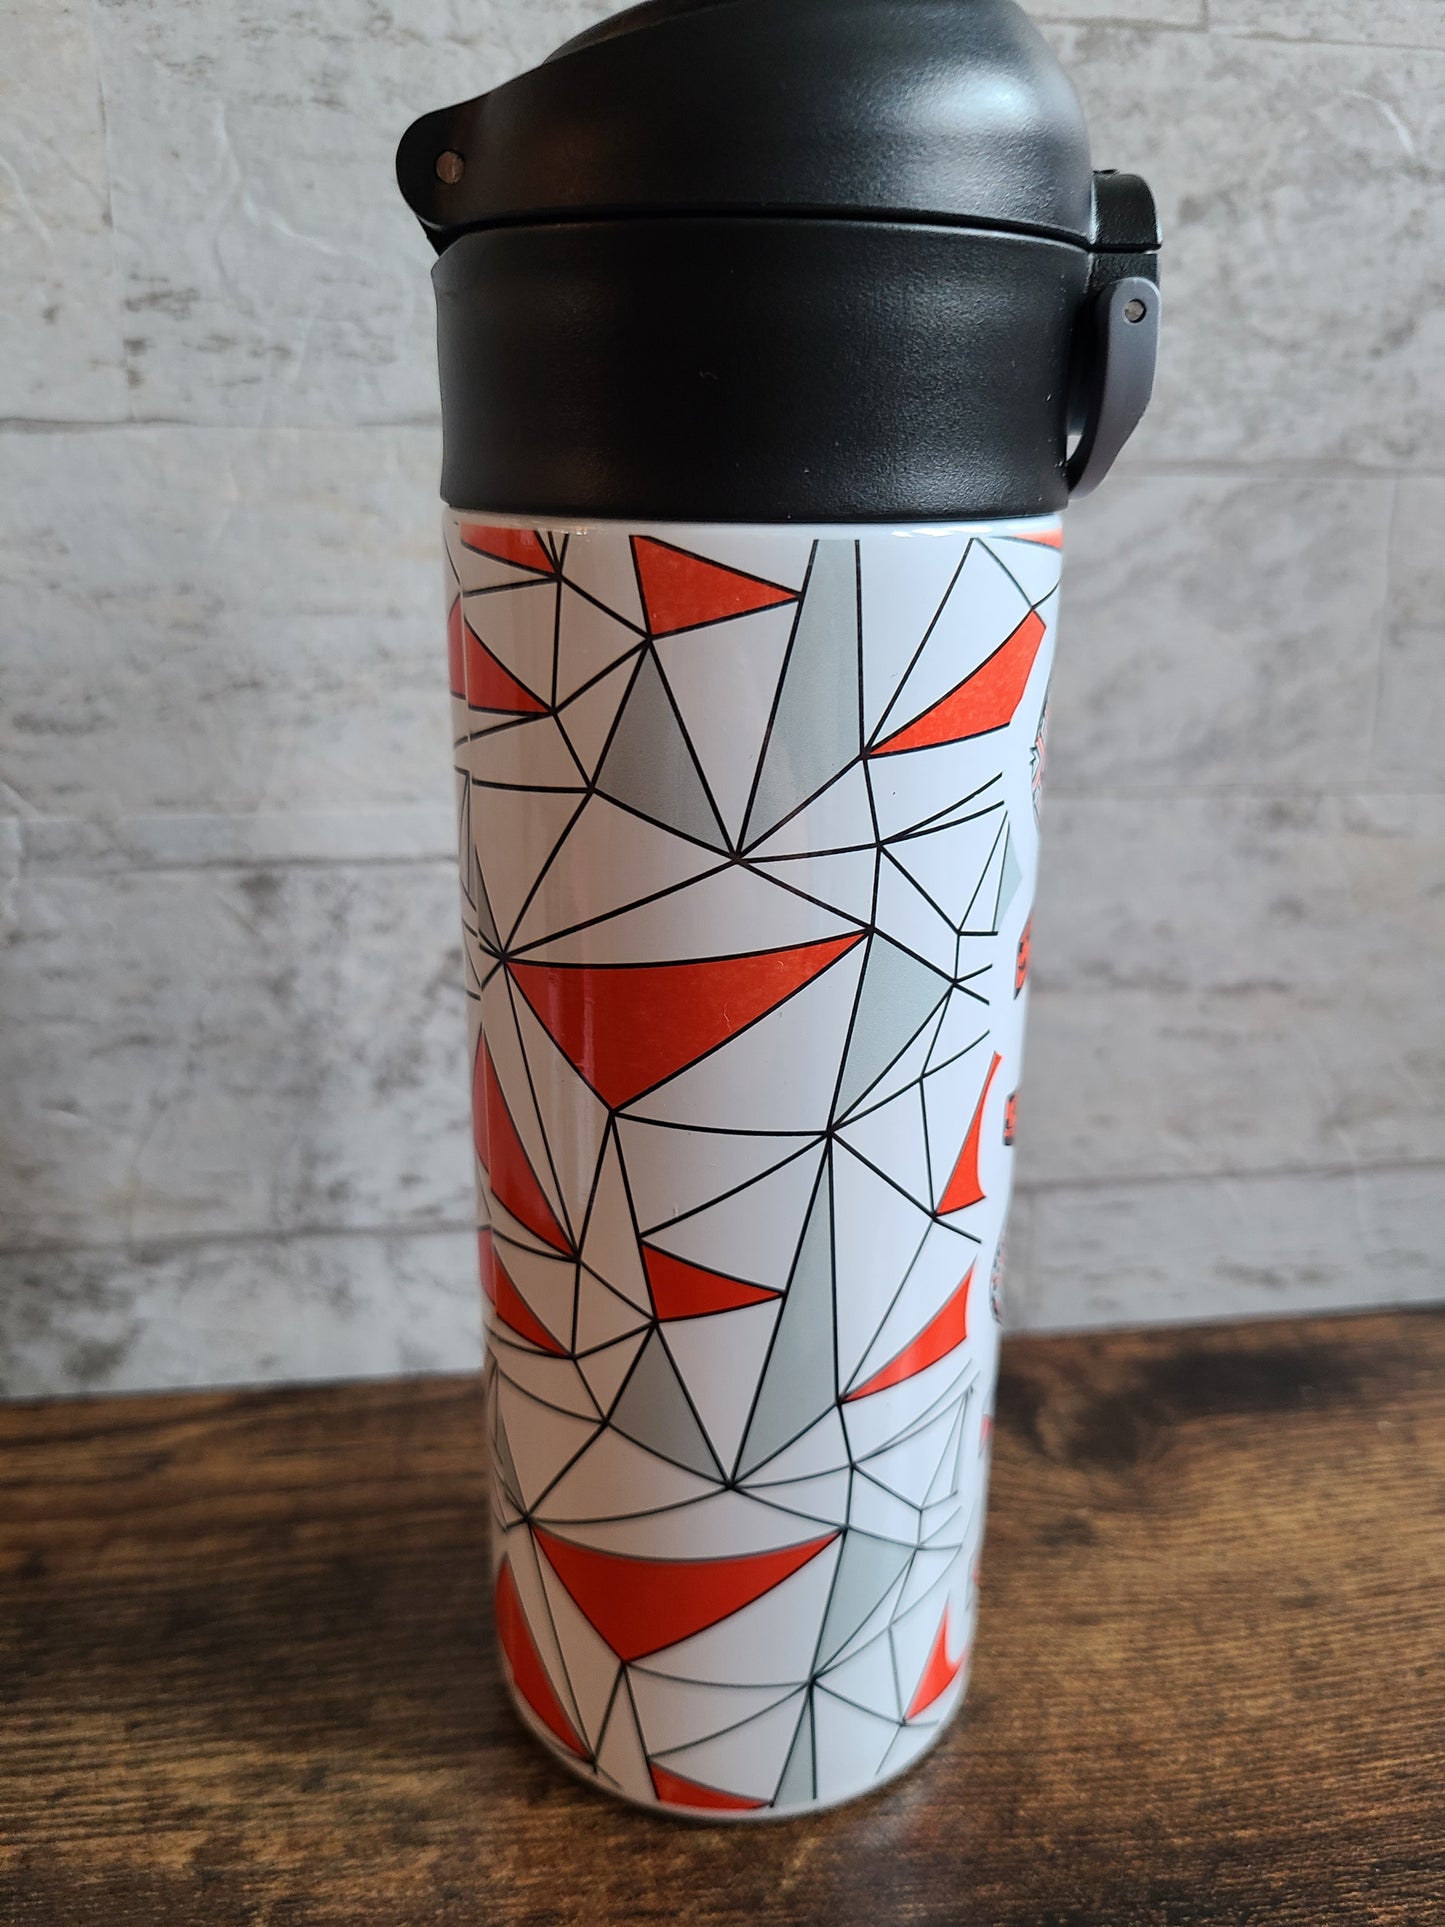 Personalized Red & Black Water Bottle - 12 oz Flip Top Water Bottle with Straw